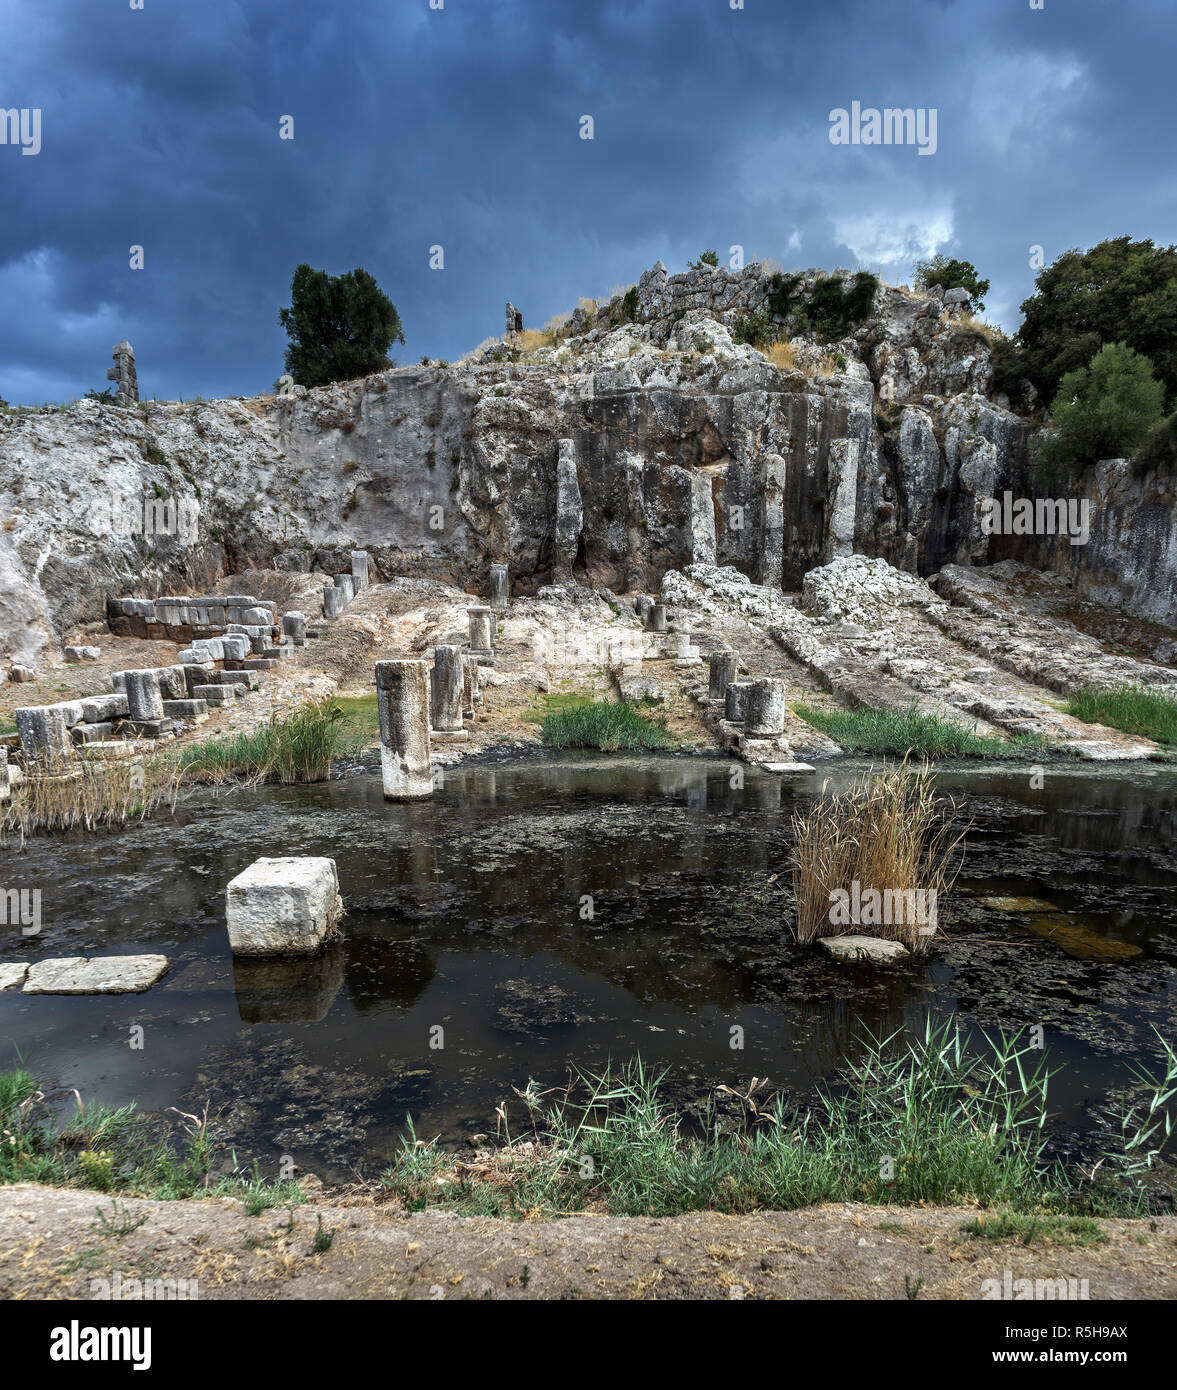 Ancient Greece, ruins of the harbor in town Oiniades (iniades) Stock Photo